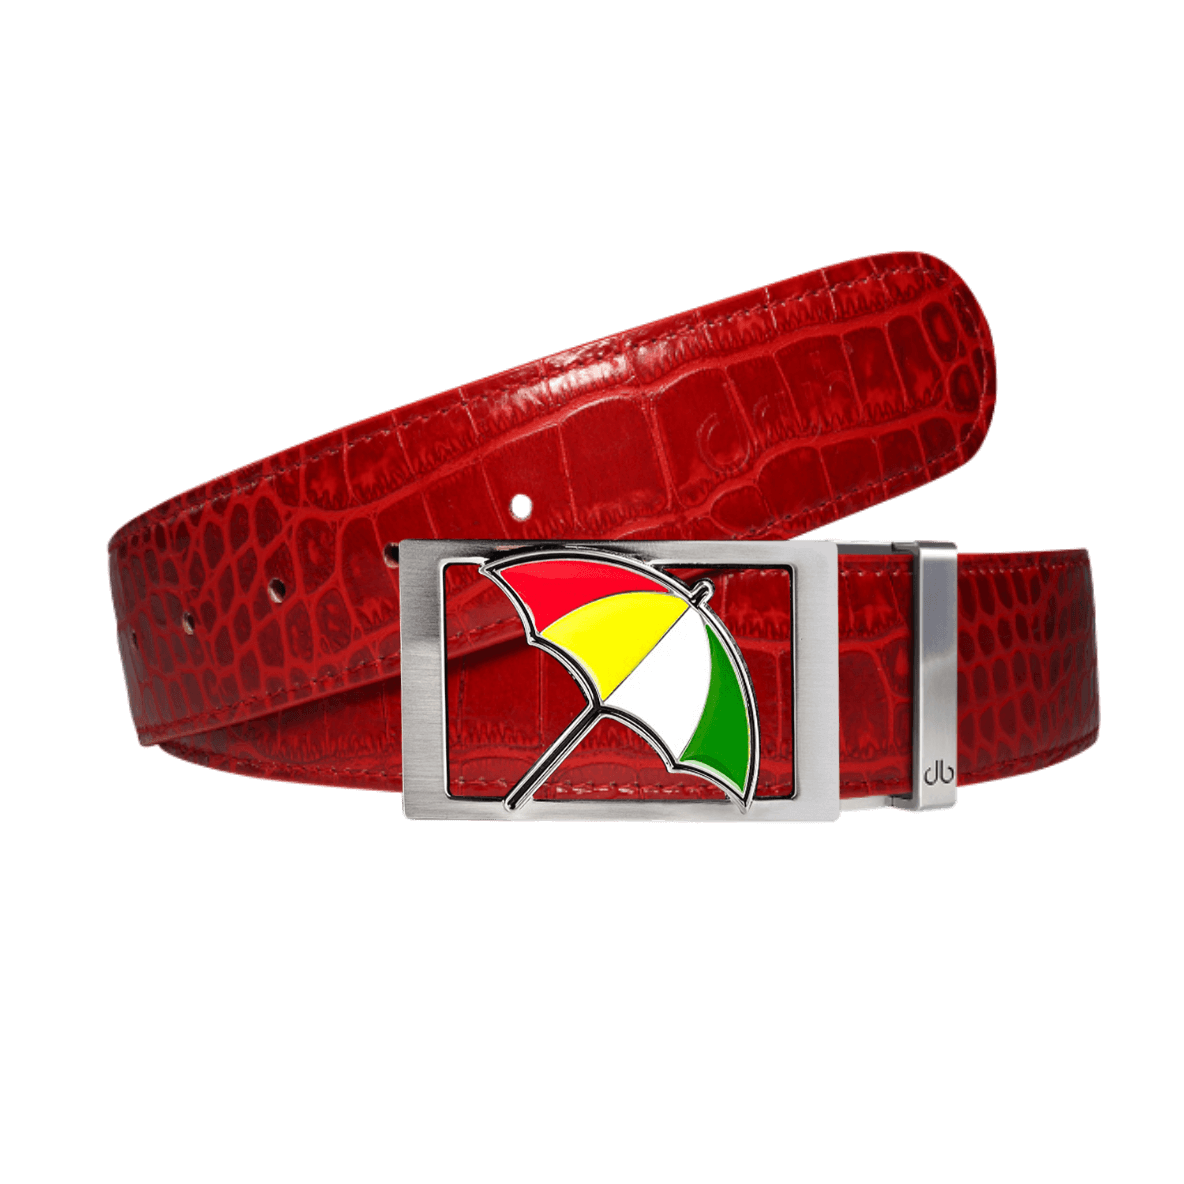 Red crocodile strap with Arnold Palmer buckle